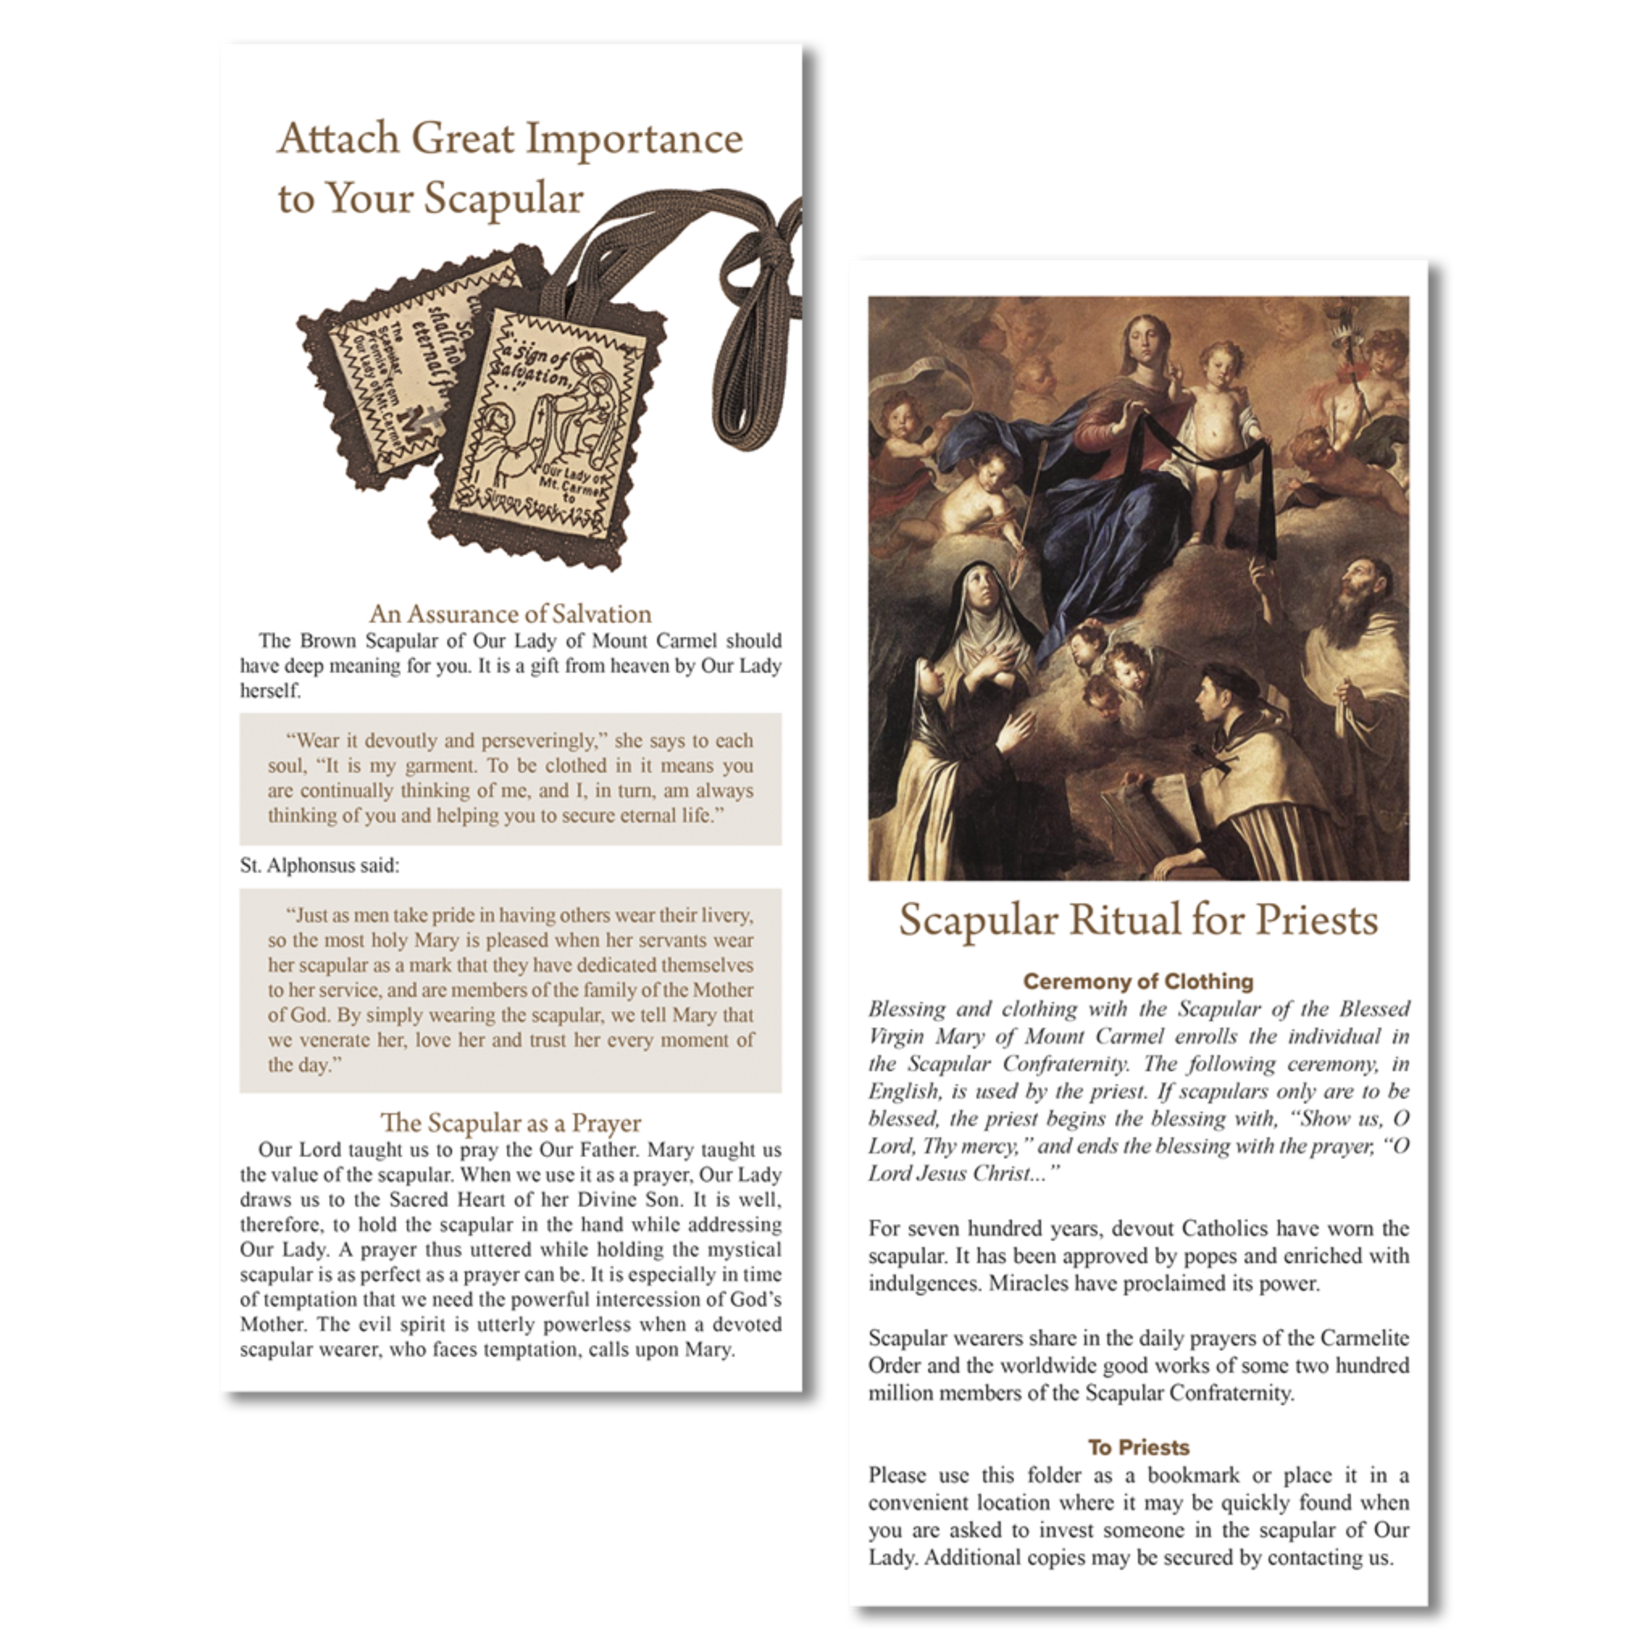 Attach Great Importance To Your Brown Scapular/Scapular Ritual For Priests Pamphlet